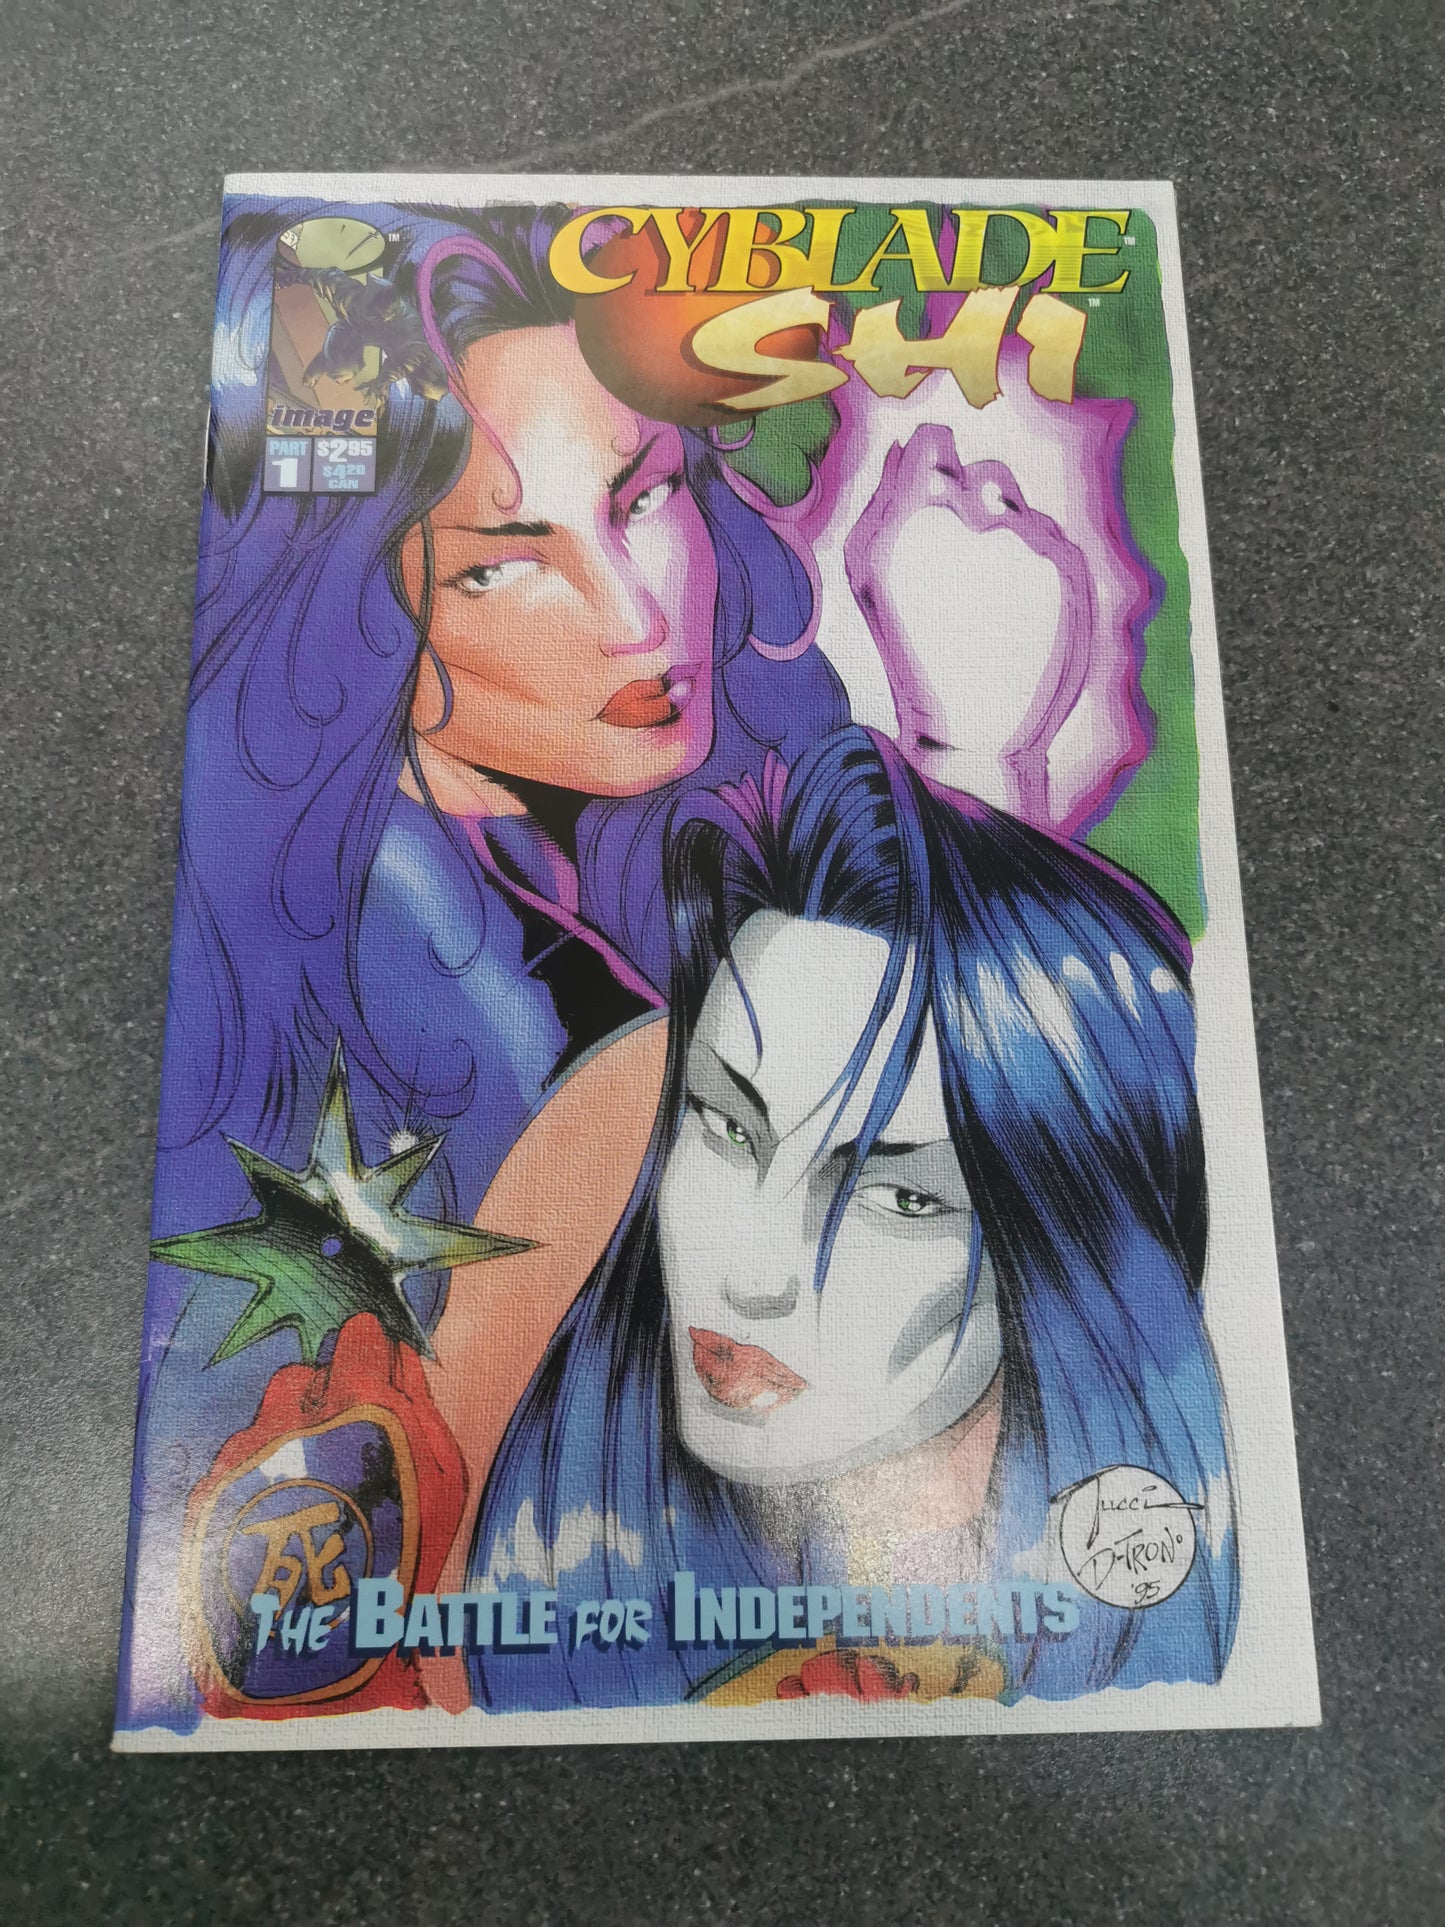 Cyblade Shi #1 The Battle For Independents 1995 comic